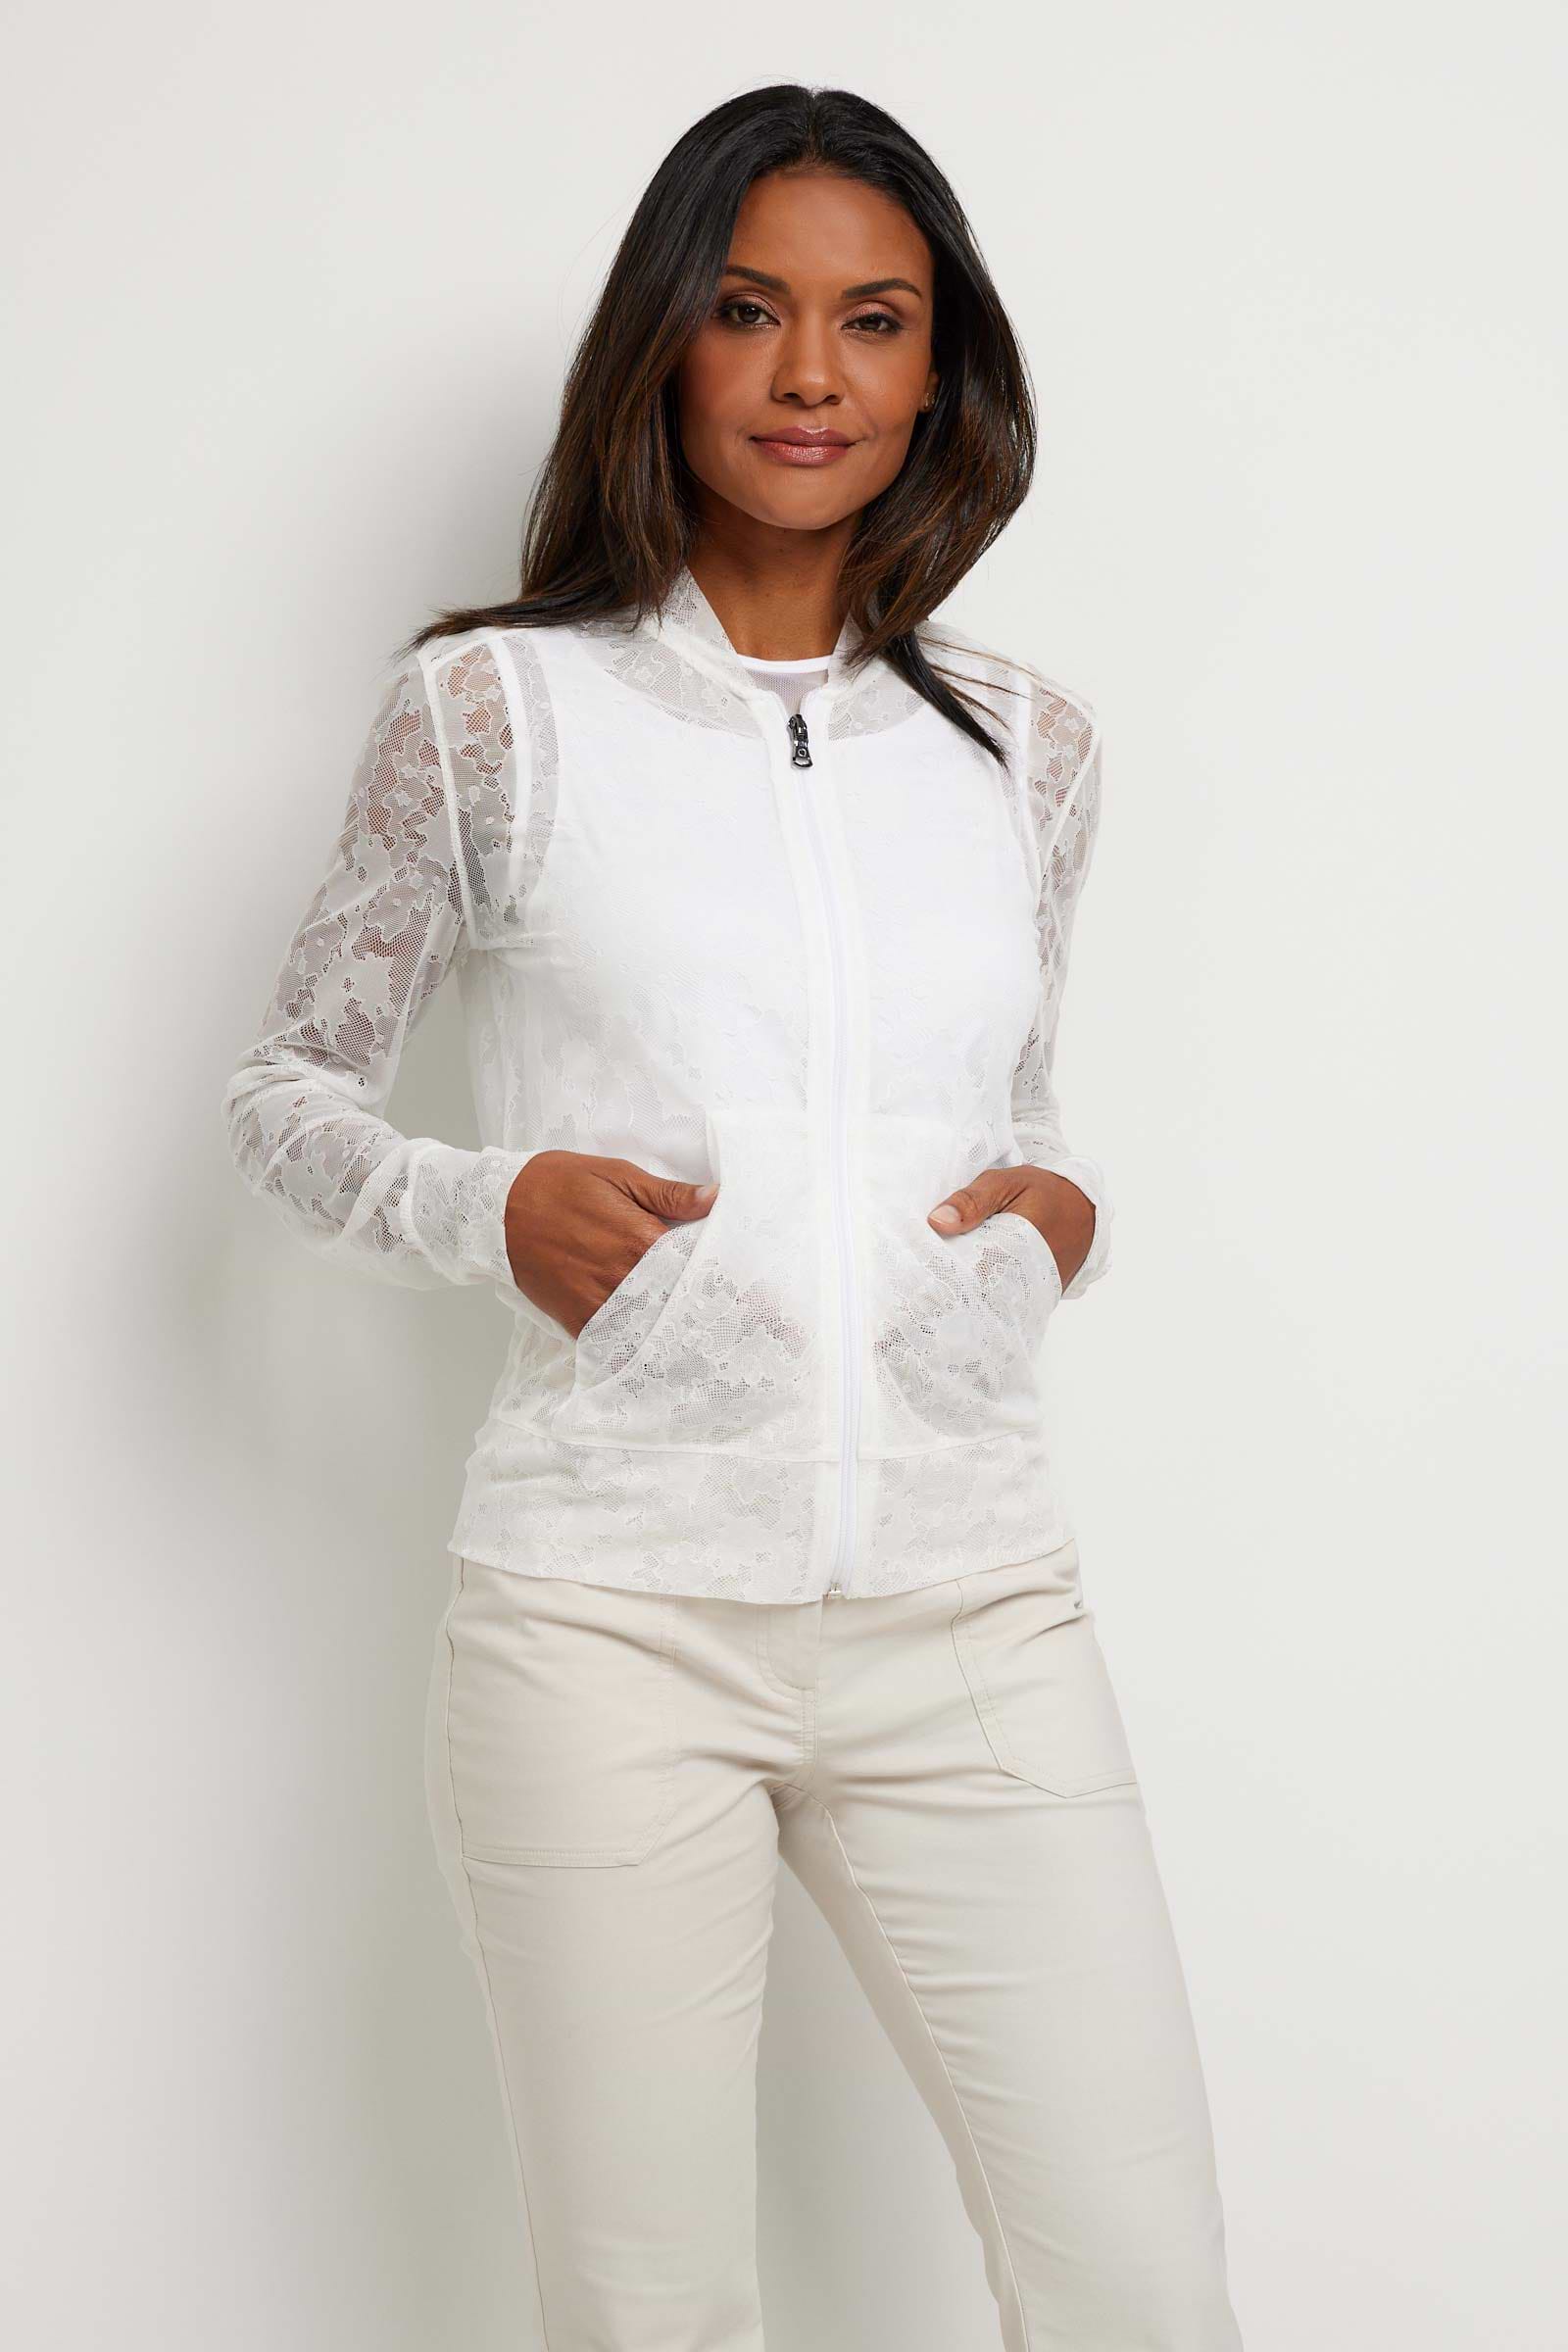 The Best Travel Jacket. Woman Showing the Front Profile of a Bailey Camo Mesh Jacket in White.